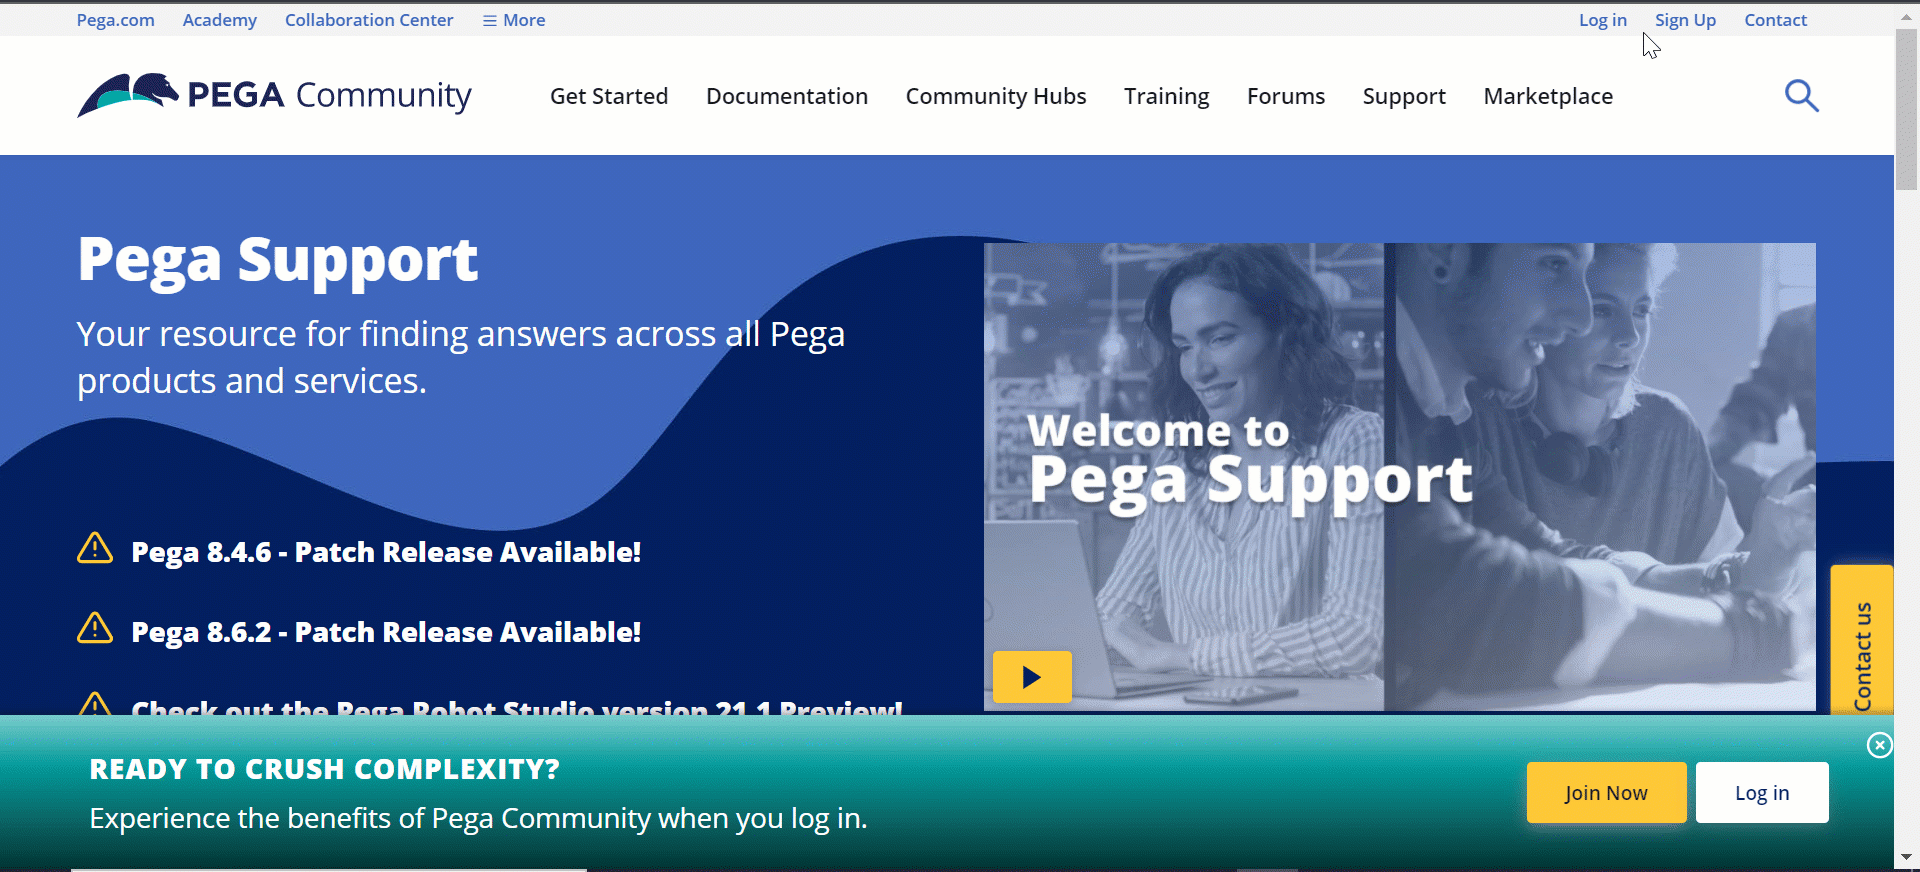 A gif showing how to log in to PDC through the Pega Support portal on Pega Community.